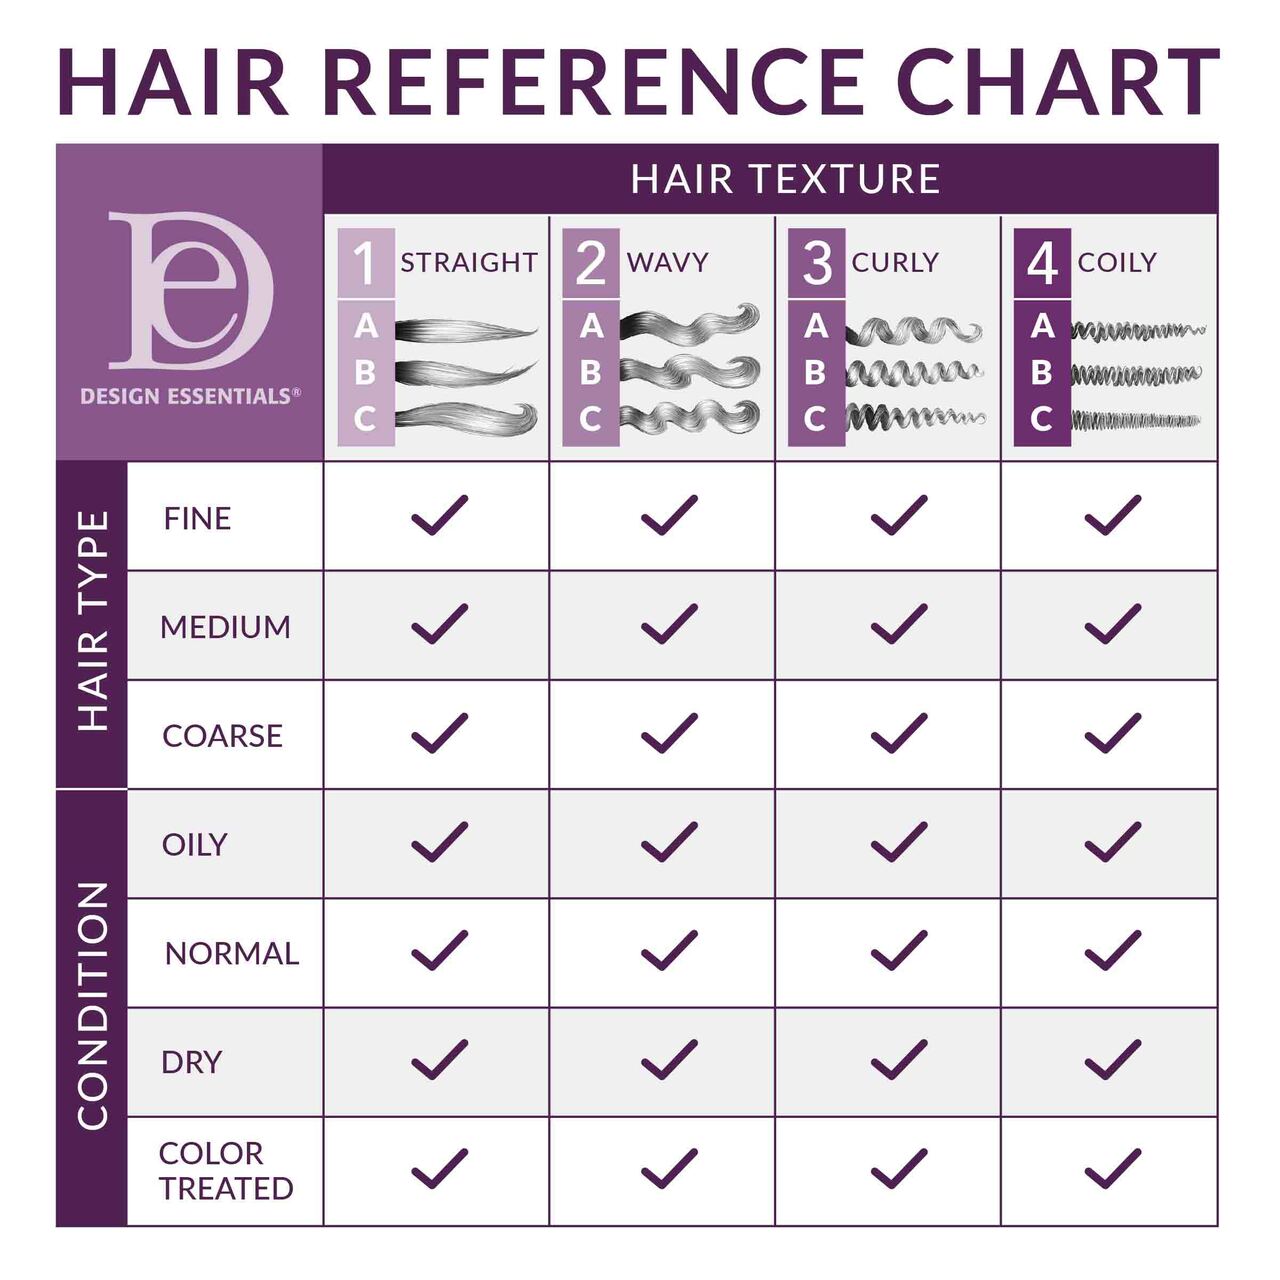 Almond_Butter_Express_Instant_Moisturizing_Shampoo_-_Hair_Reference_Chart__53124.1632428097